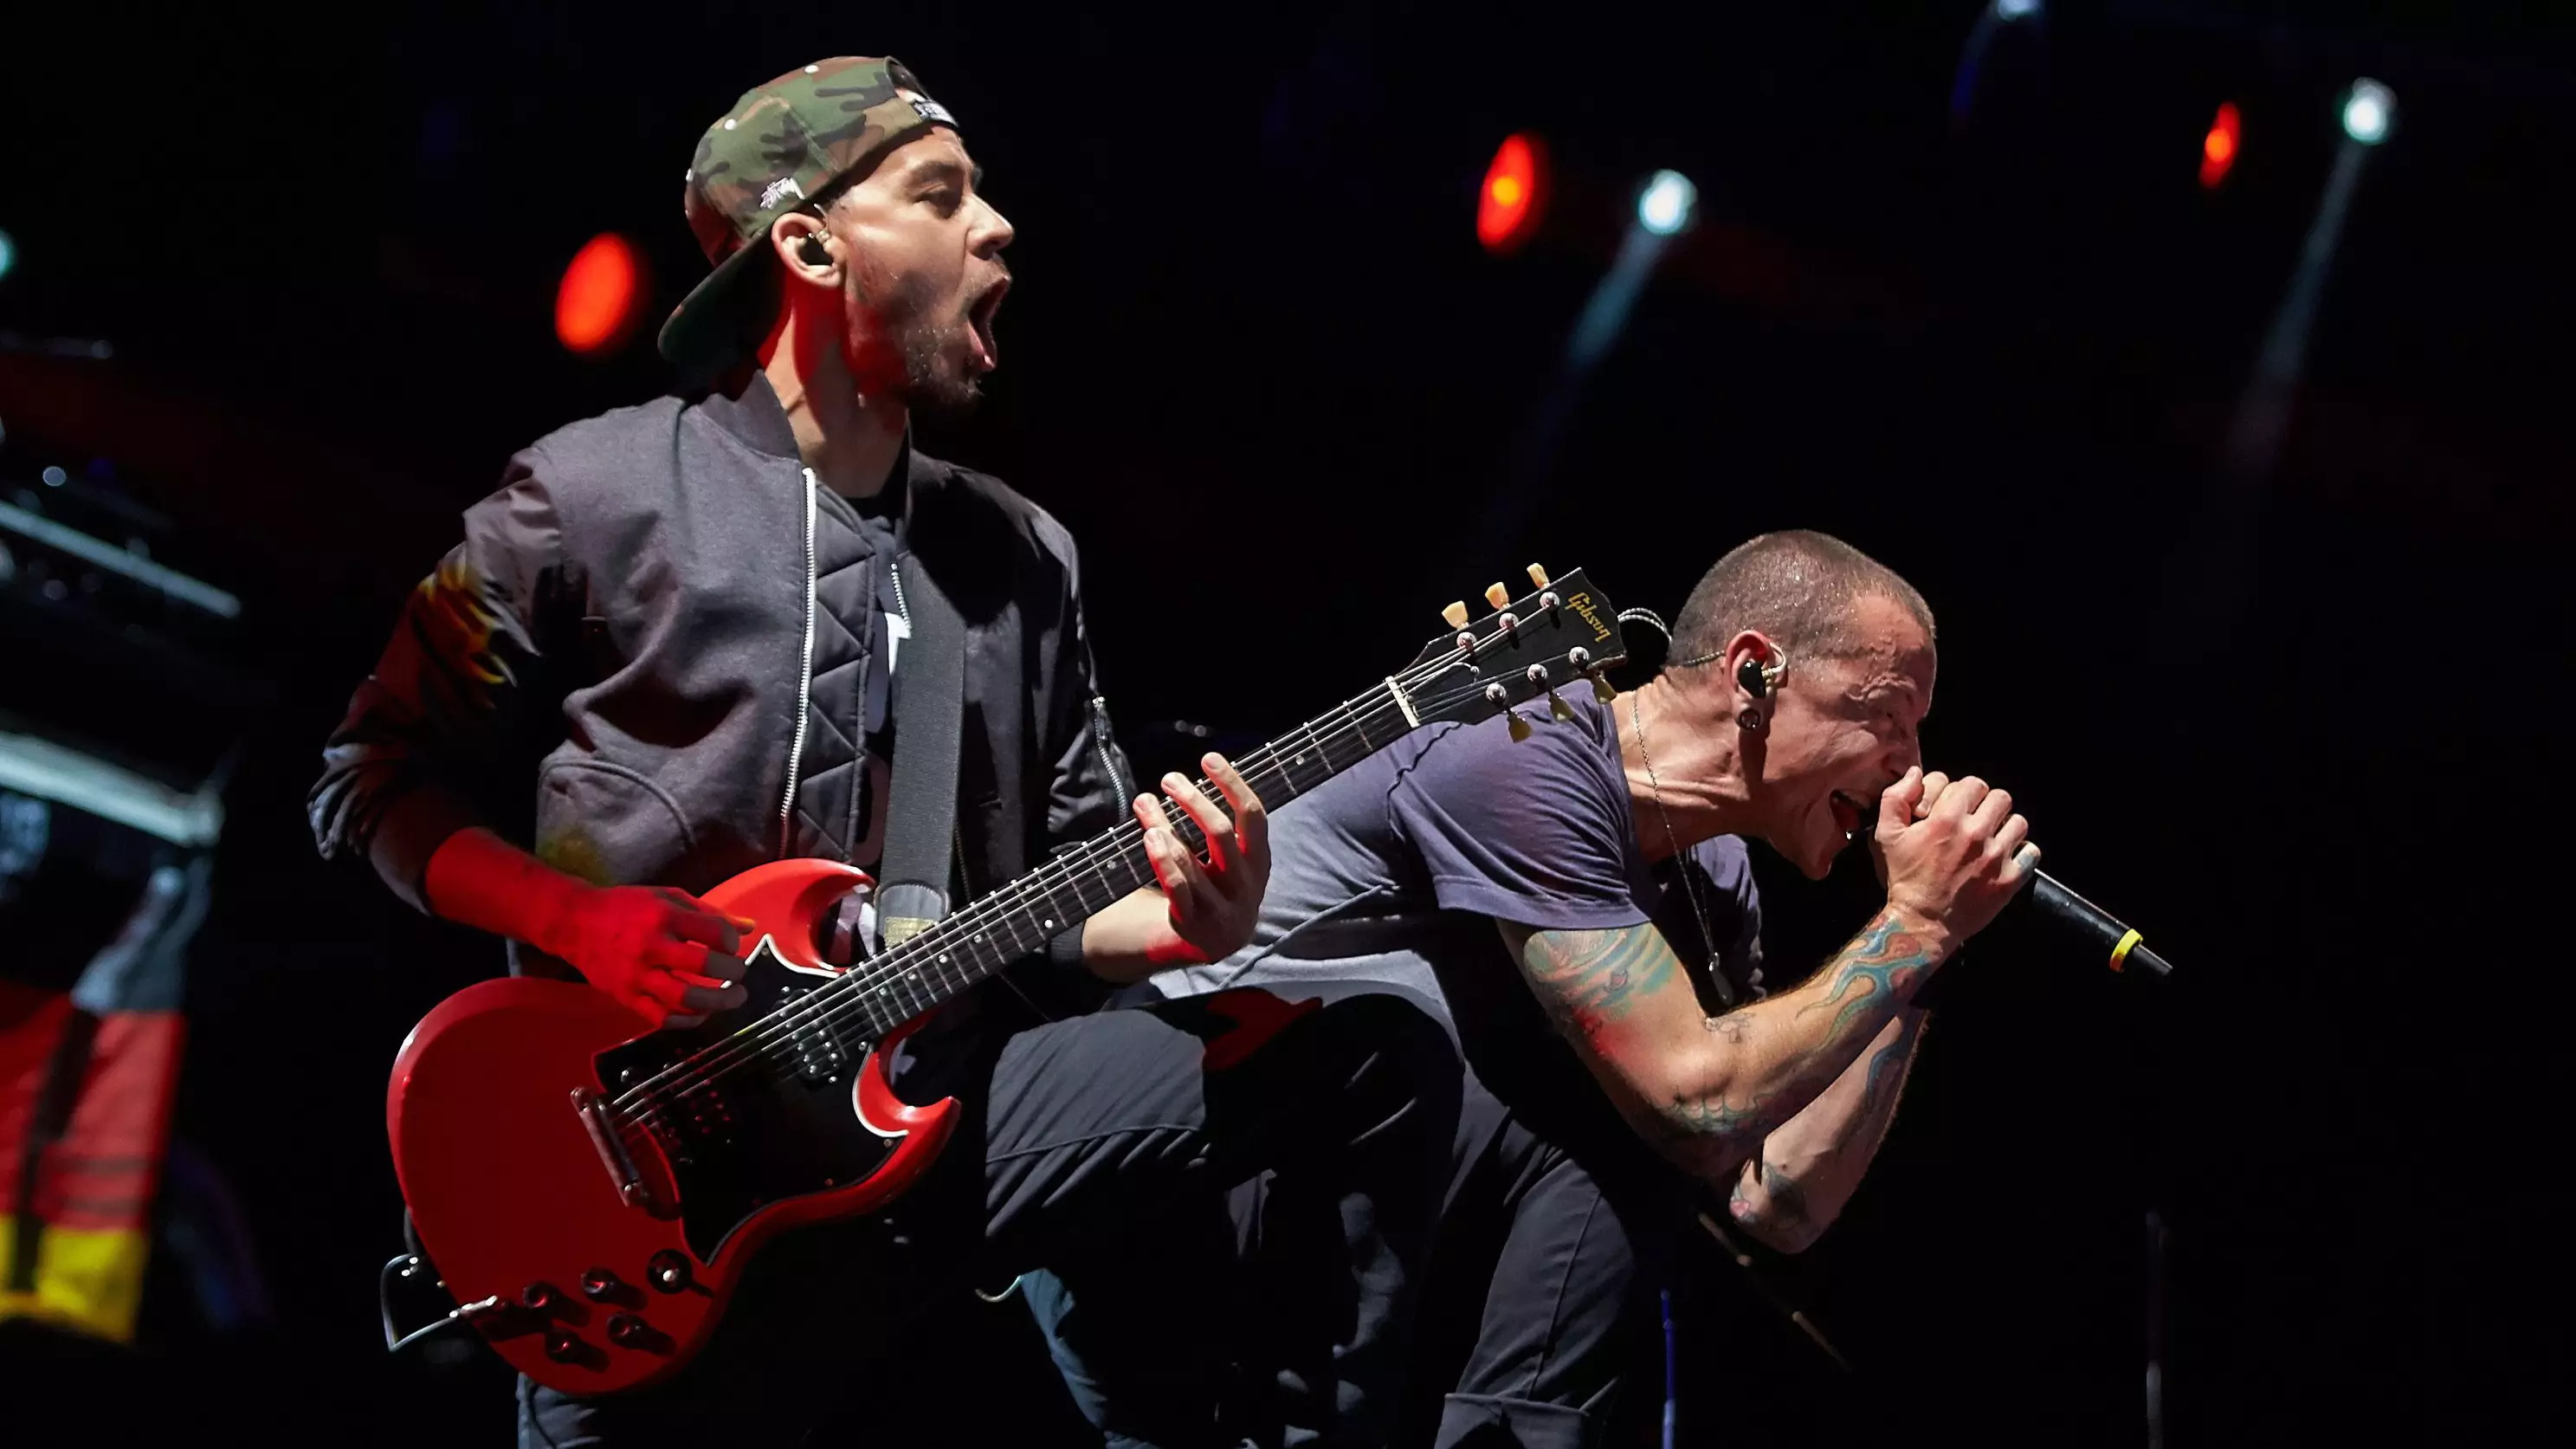 Linkin Park Are Using Lockdown To Work On New Music